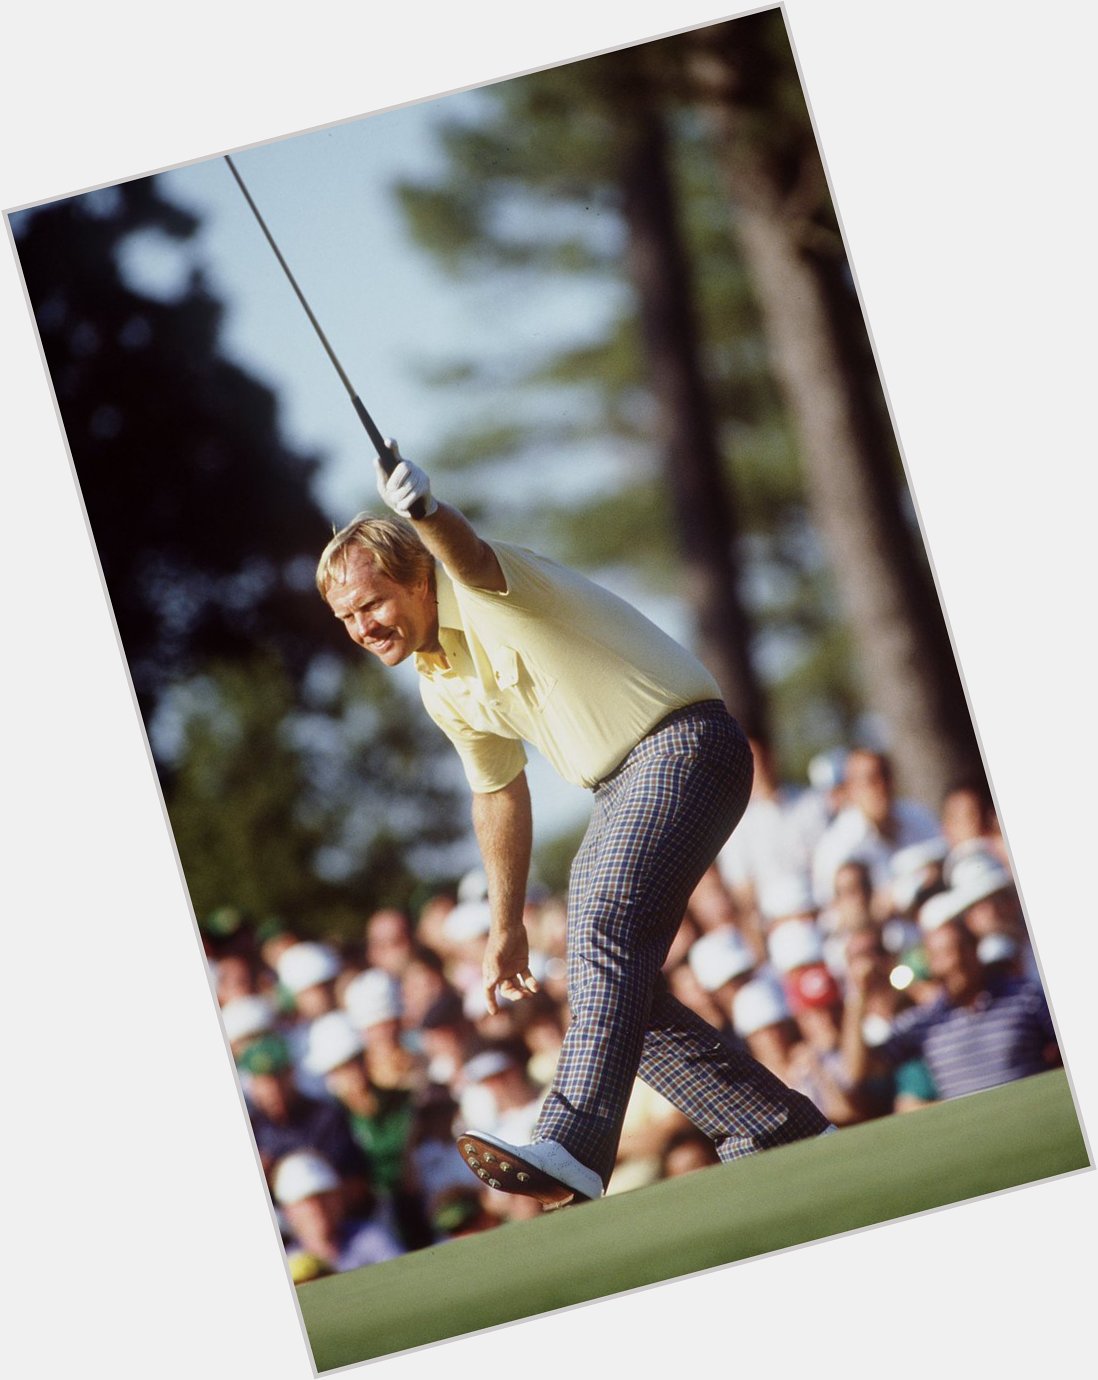 18 Majors, 80 years. Happy Birthday to the Golden Bear, Jack Nicklaus 